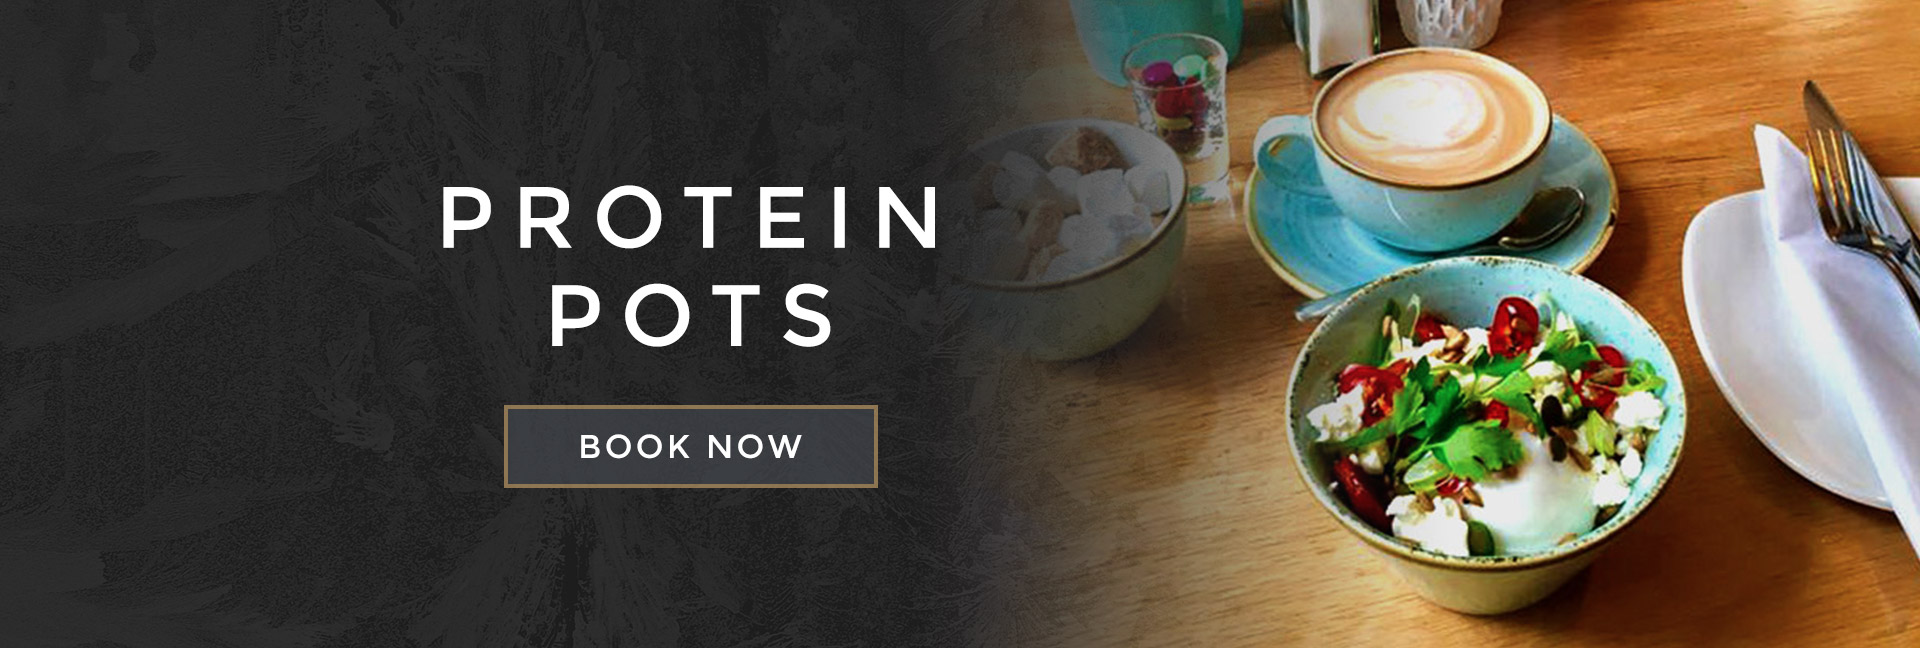 Protein pots at All Bar One Newhall Street Birmingham - Book your table